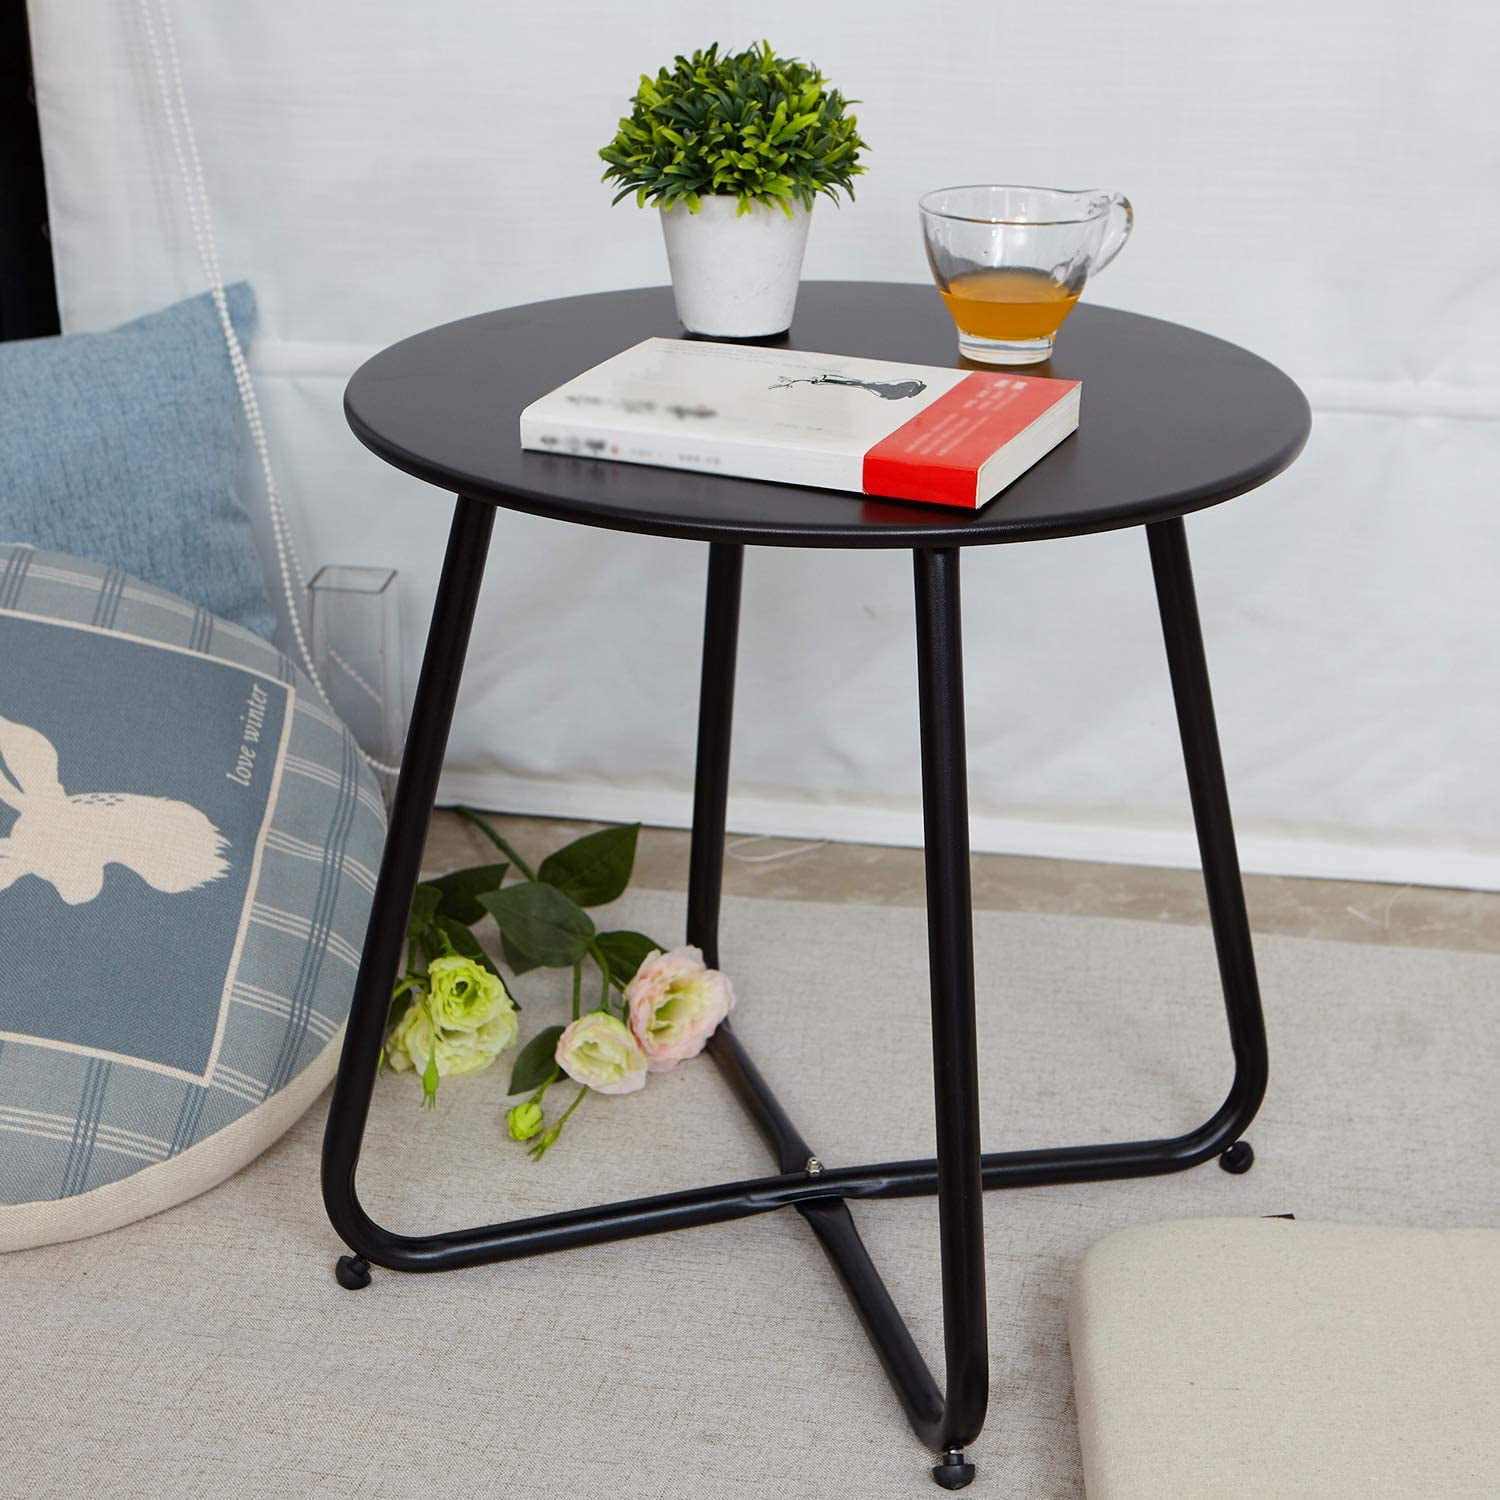 Grand Patio Outdoor&Indoor Steel Patio Side Table, Weather Resistant Outdoor Small Round End Table for Patio, Yard, Balcony, Garden, Living Room, Bedroom, Black - image 1 of 9